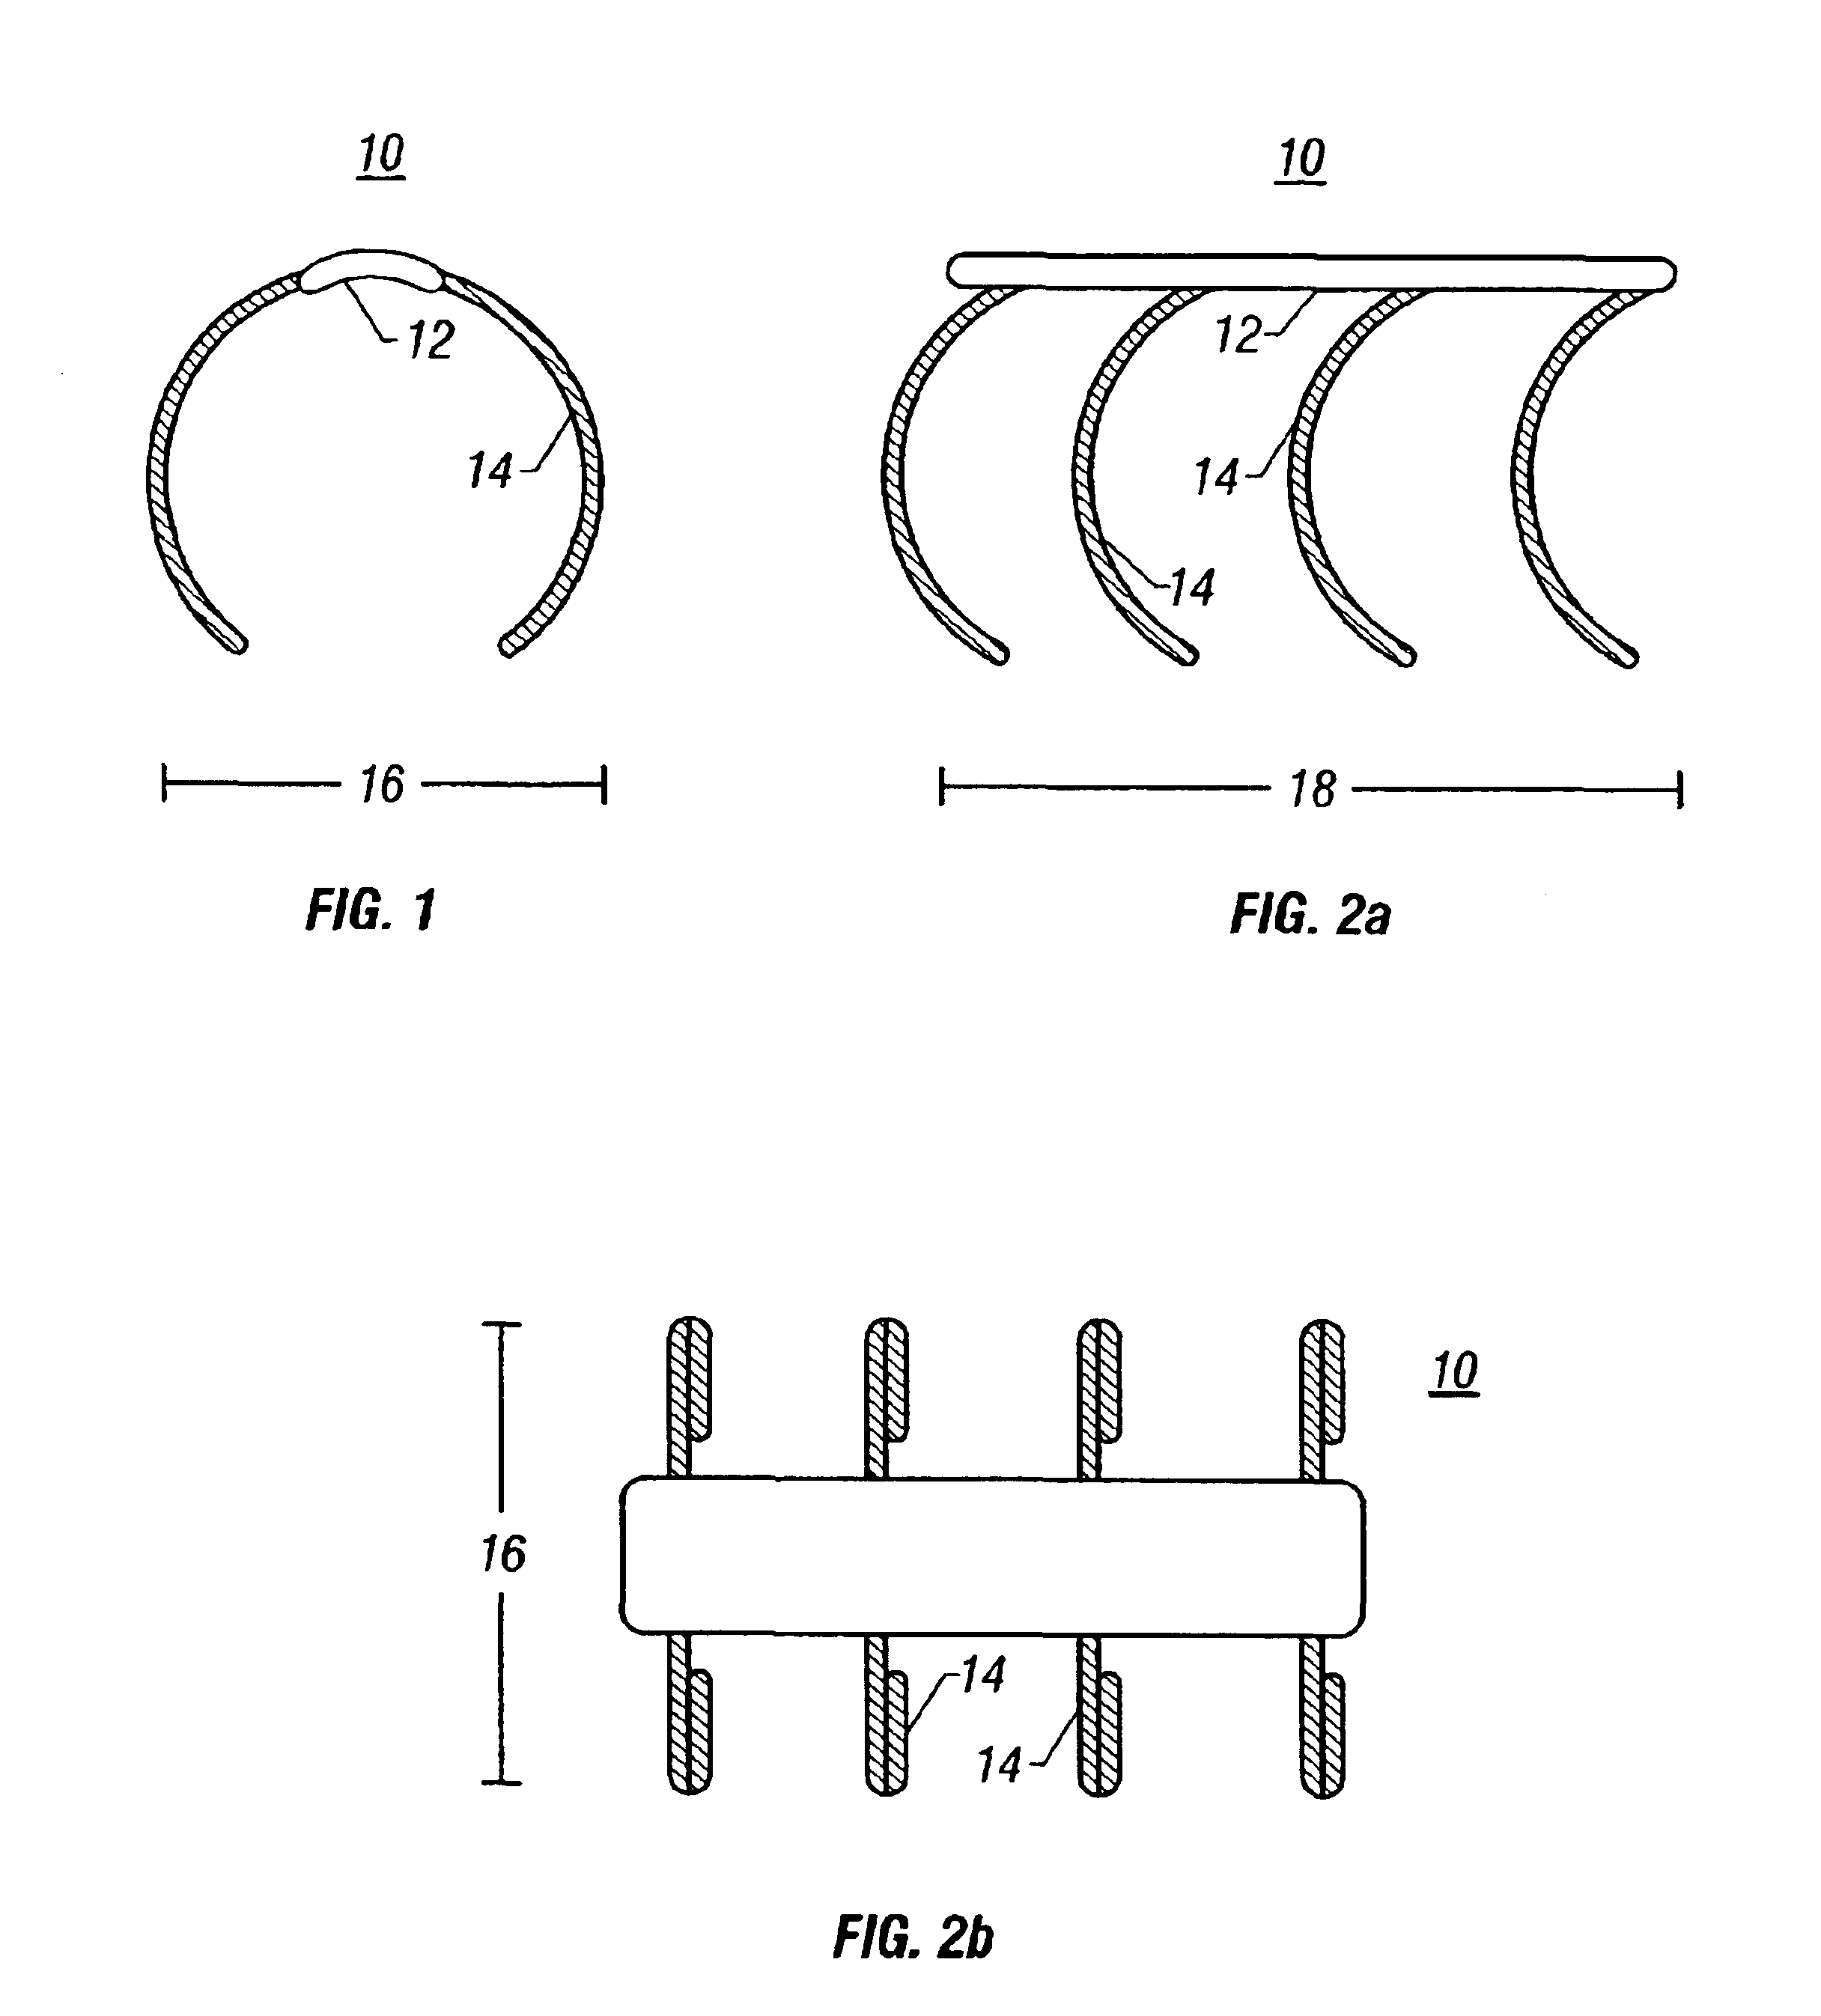 Method for surgically restoring coronary blood vessels